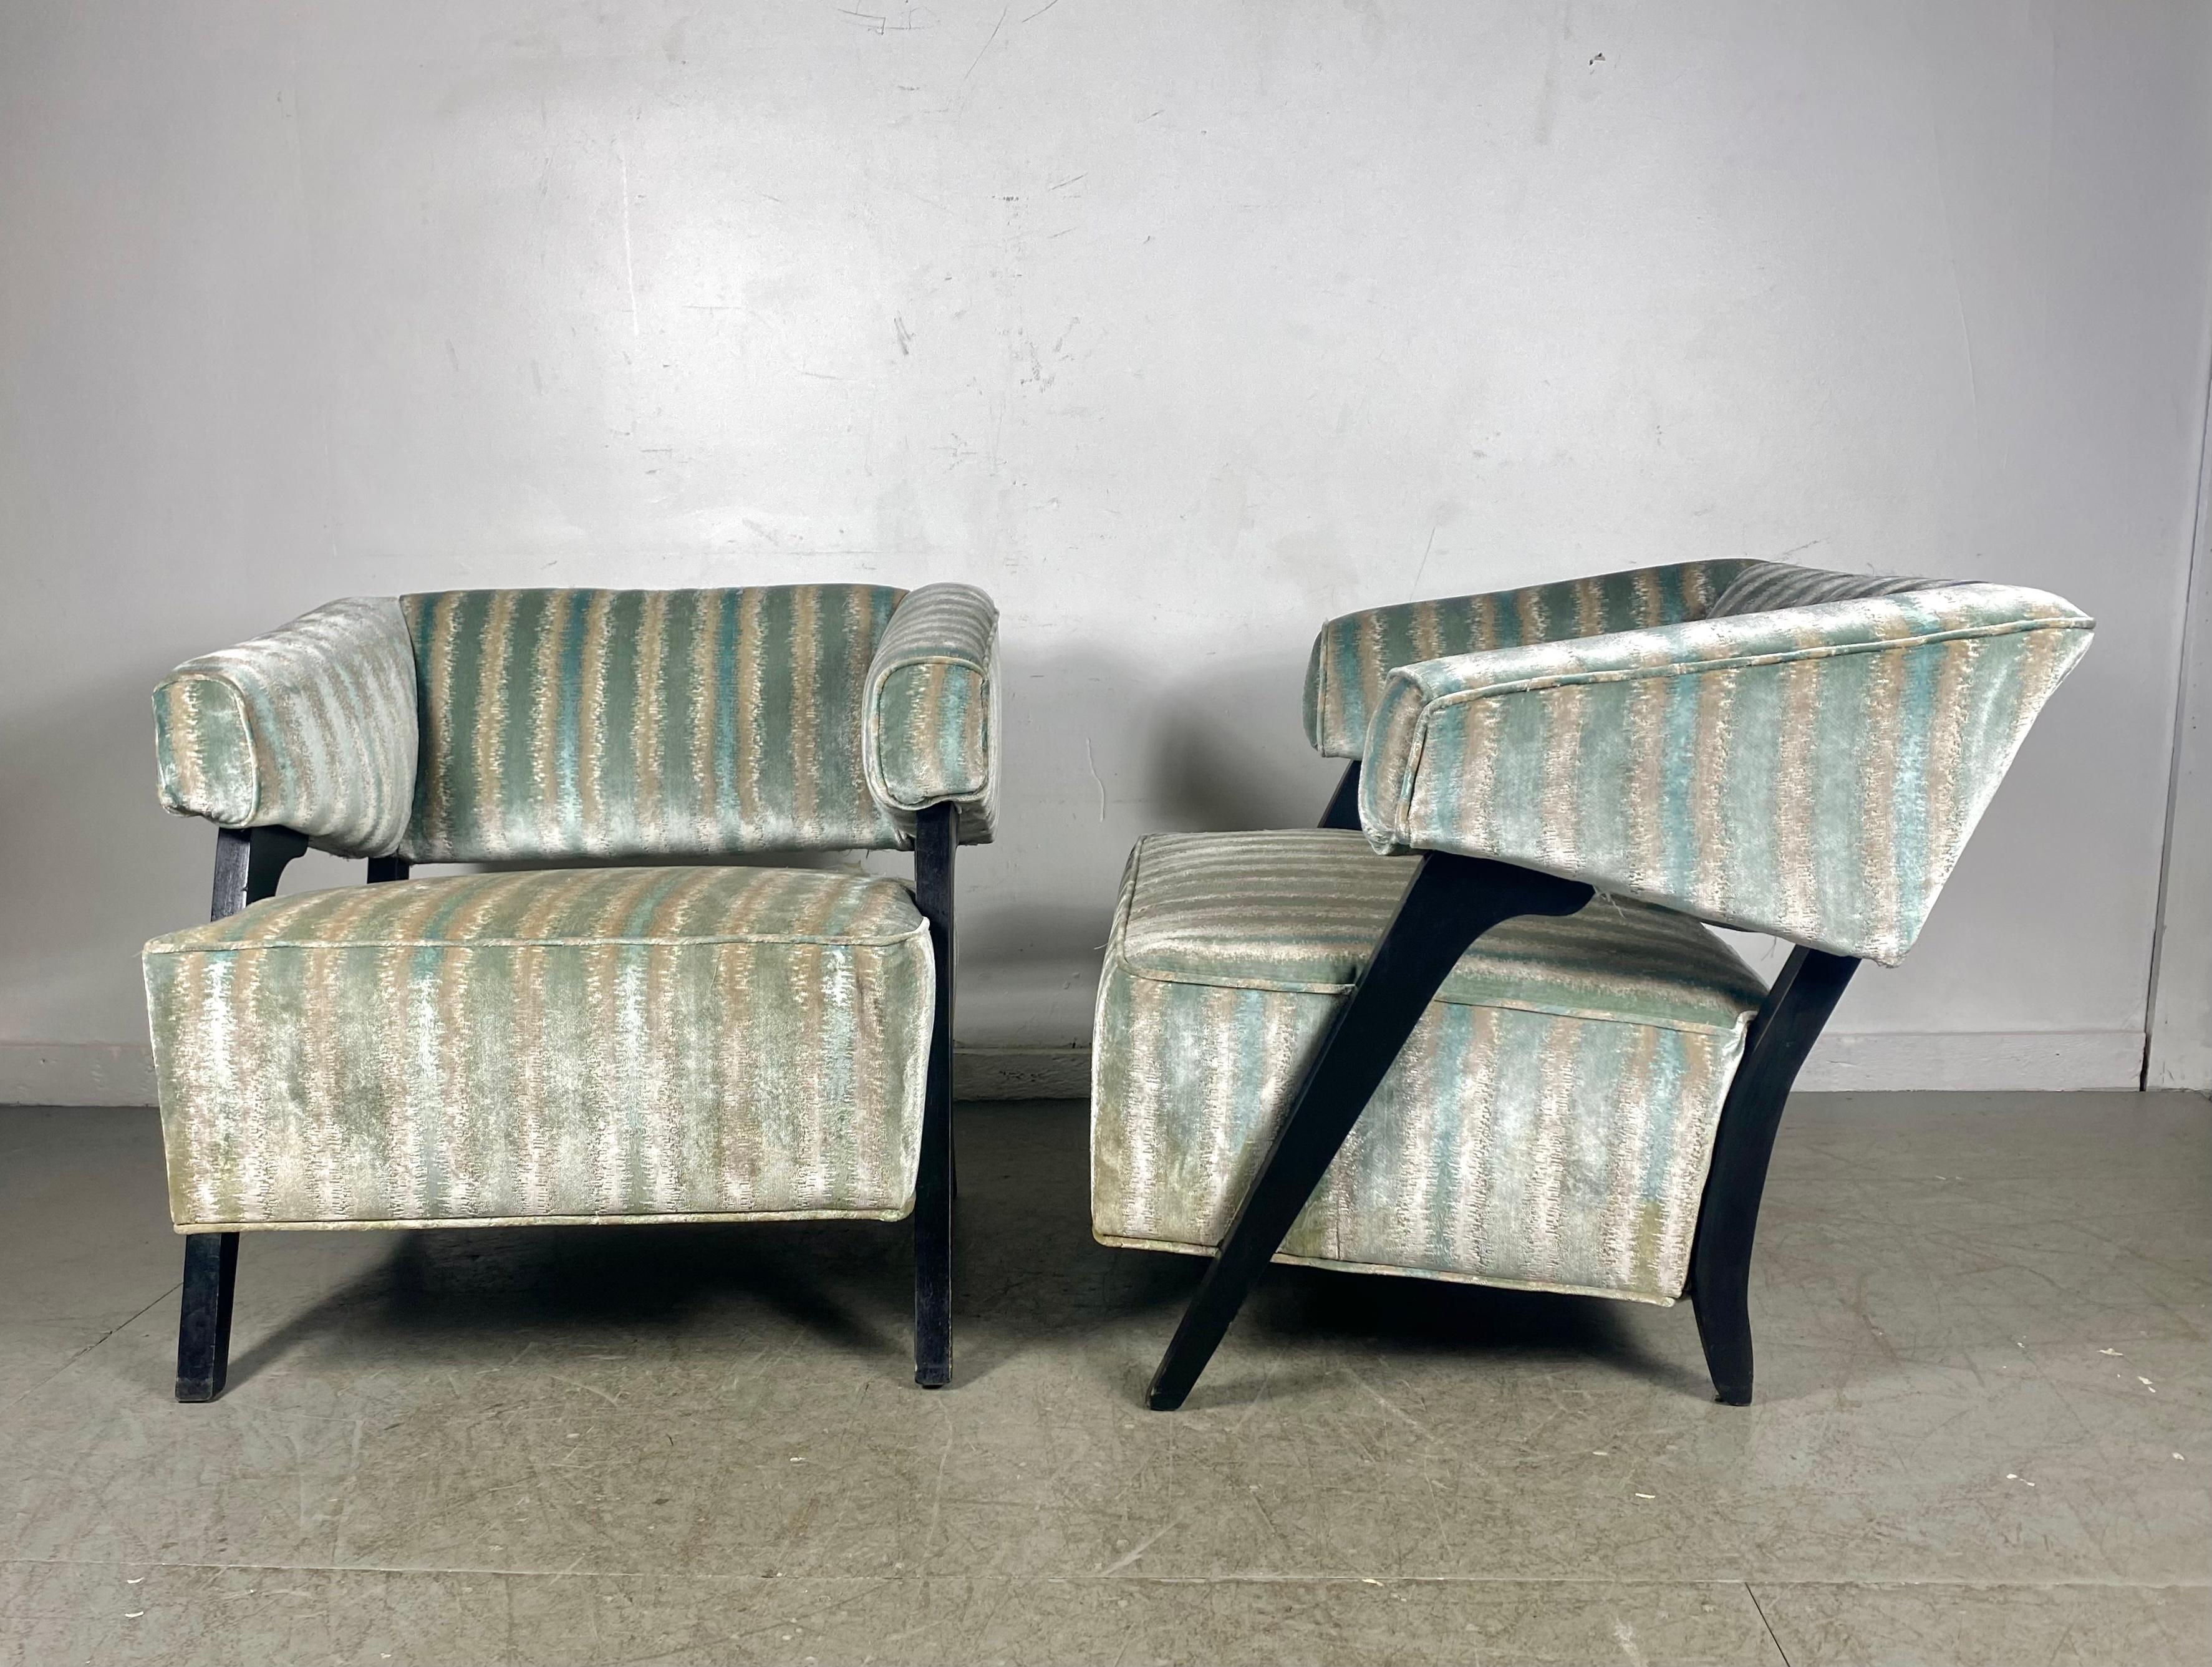 Lacquered Pair Modernist Lounge Chairs, Attributed to Karpen of California